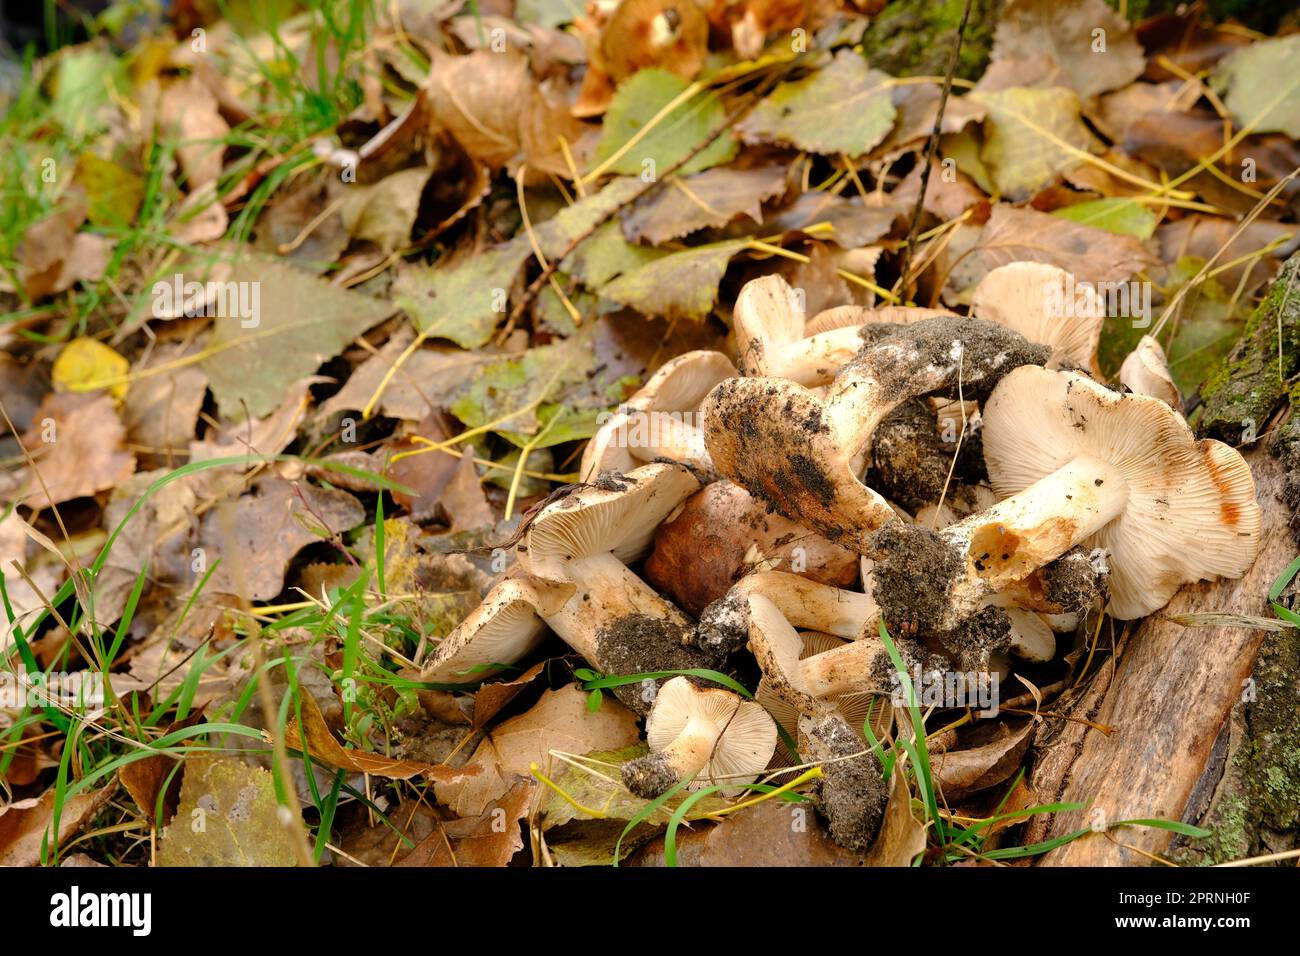 Tricholoma albobrunneum, mushrooms from Ukraine. mushrooms in the forest on the grass. Stock Photo